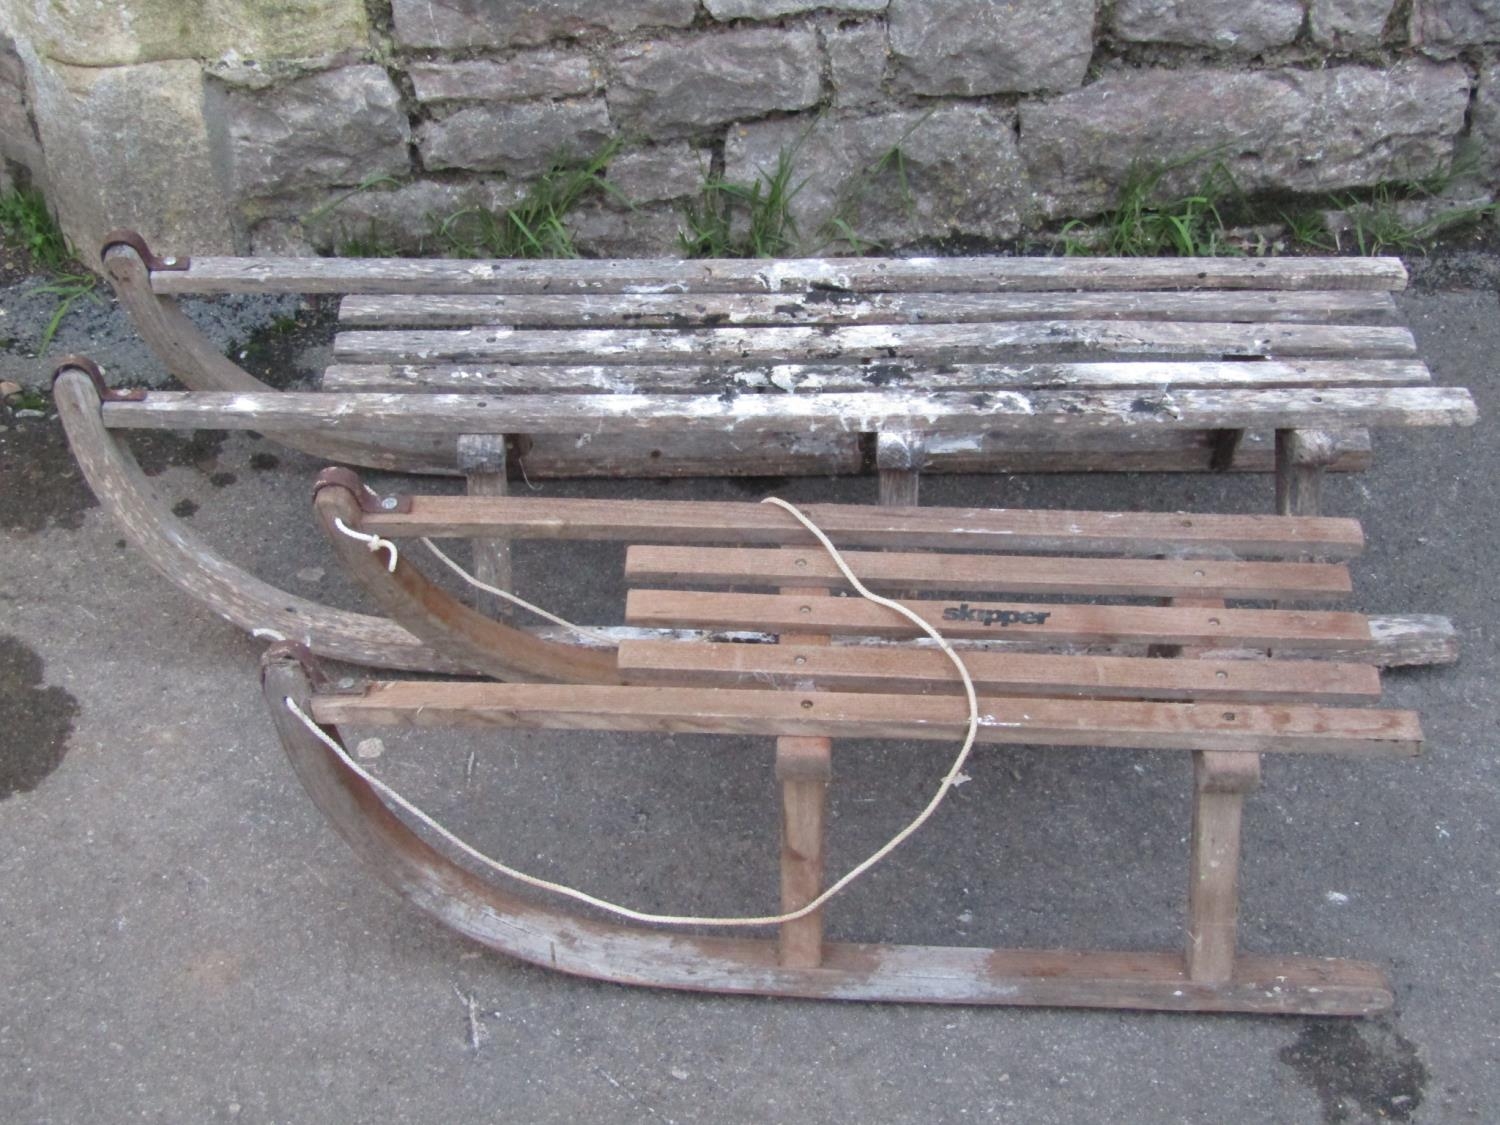 Two wooden toboggans of varying size with open slatted seats